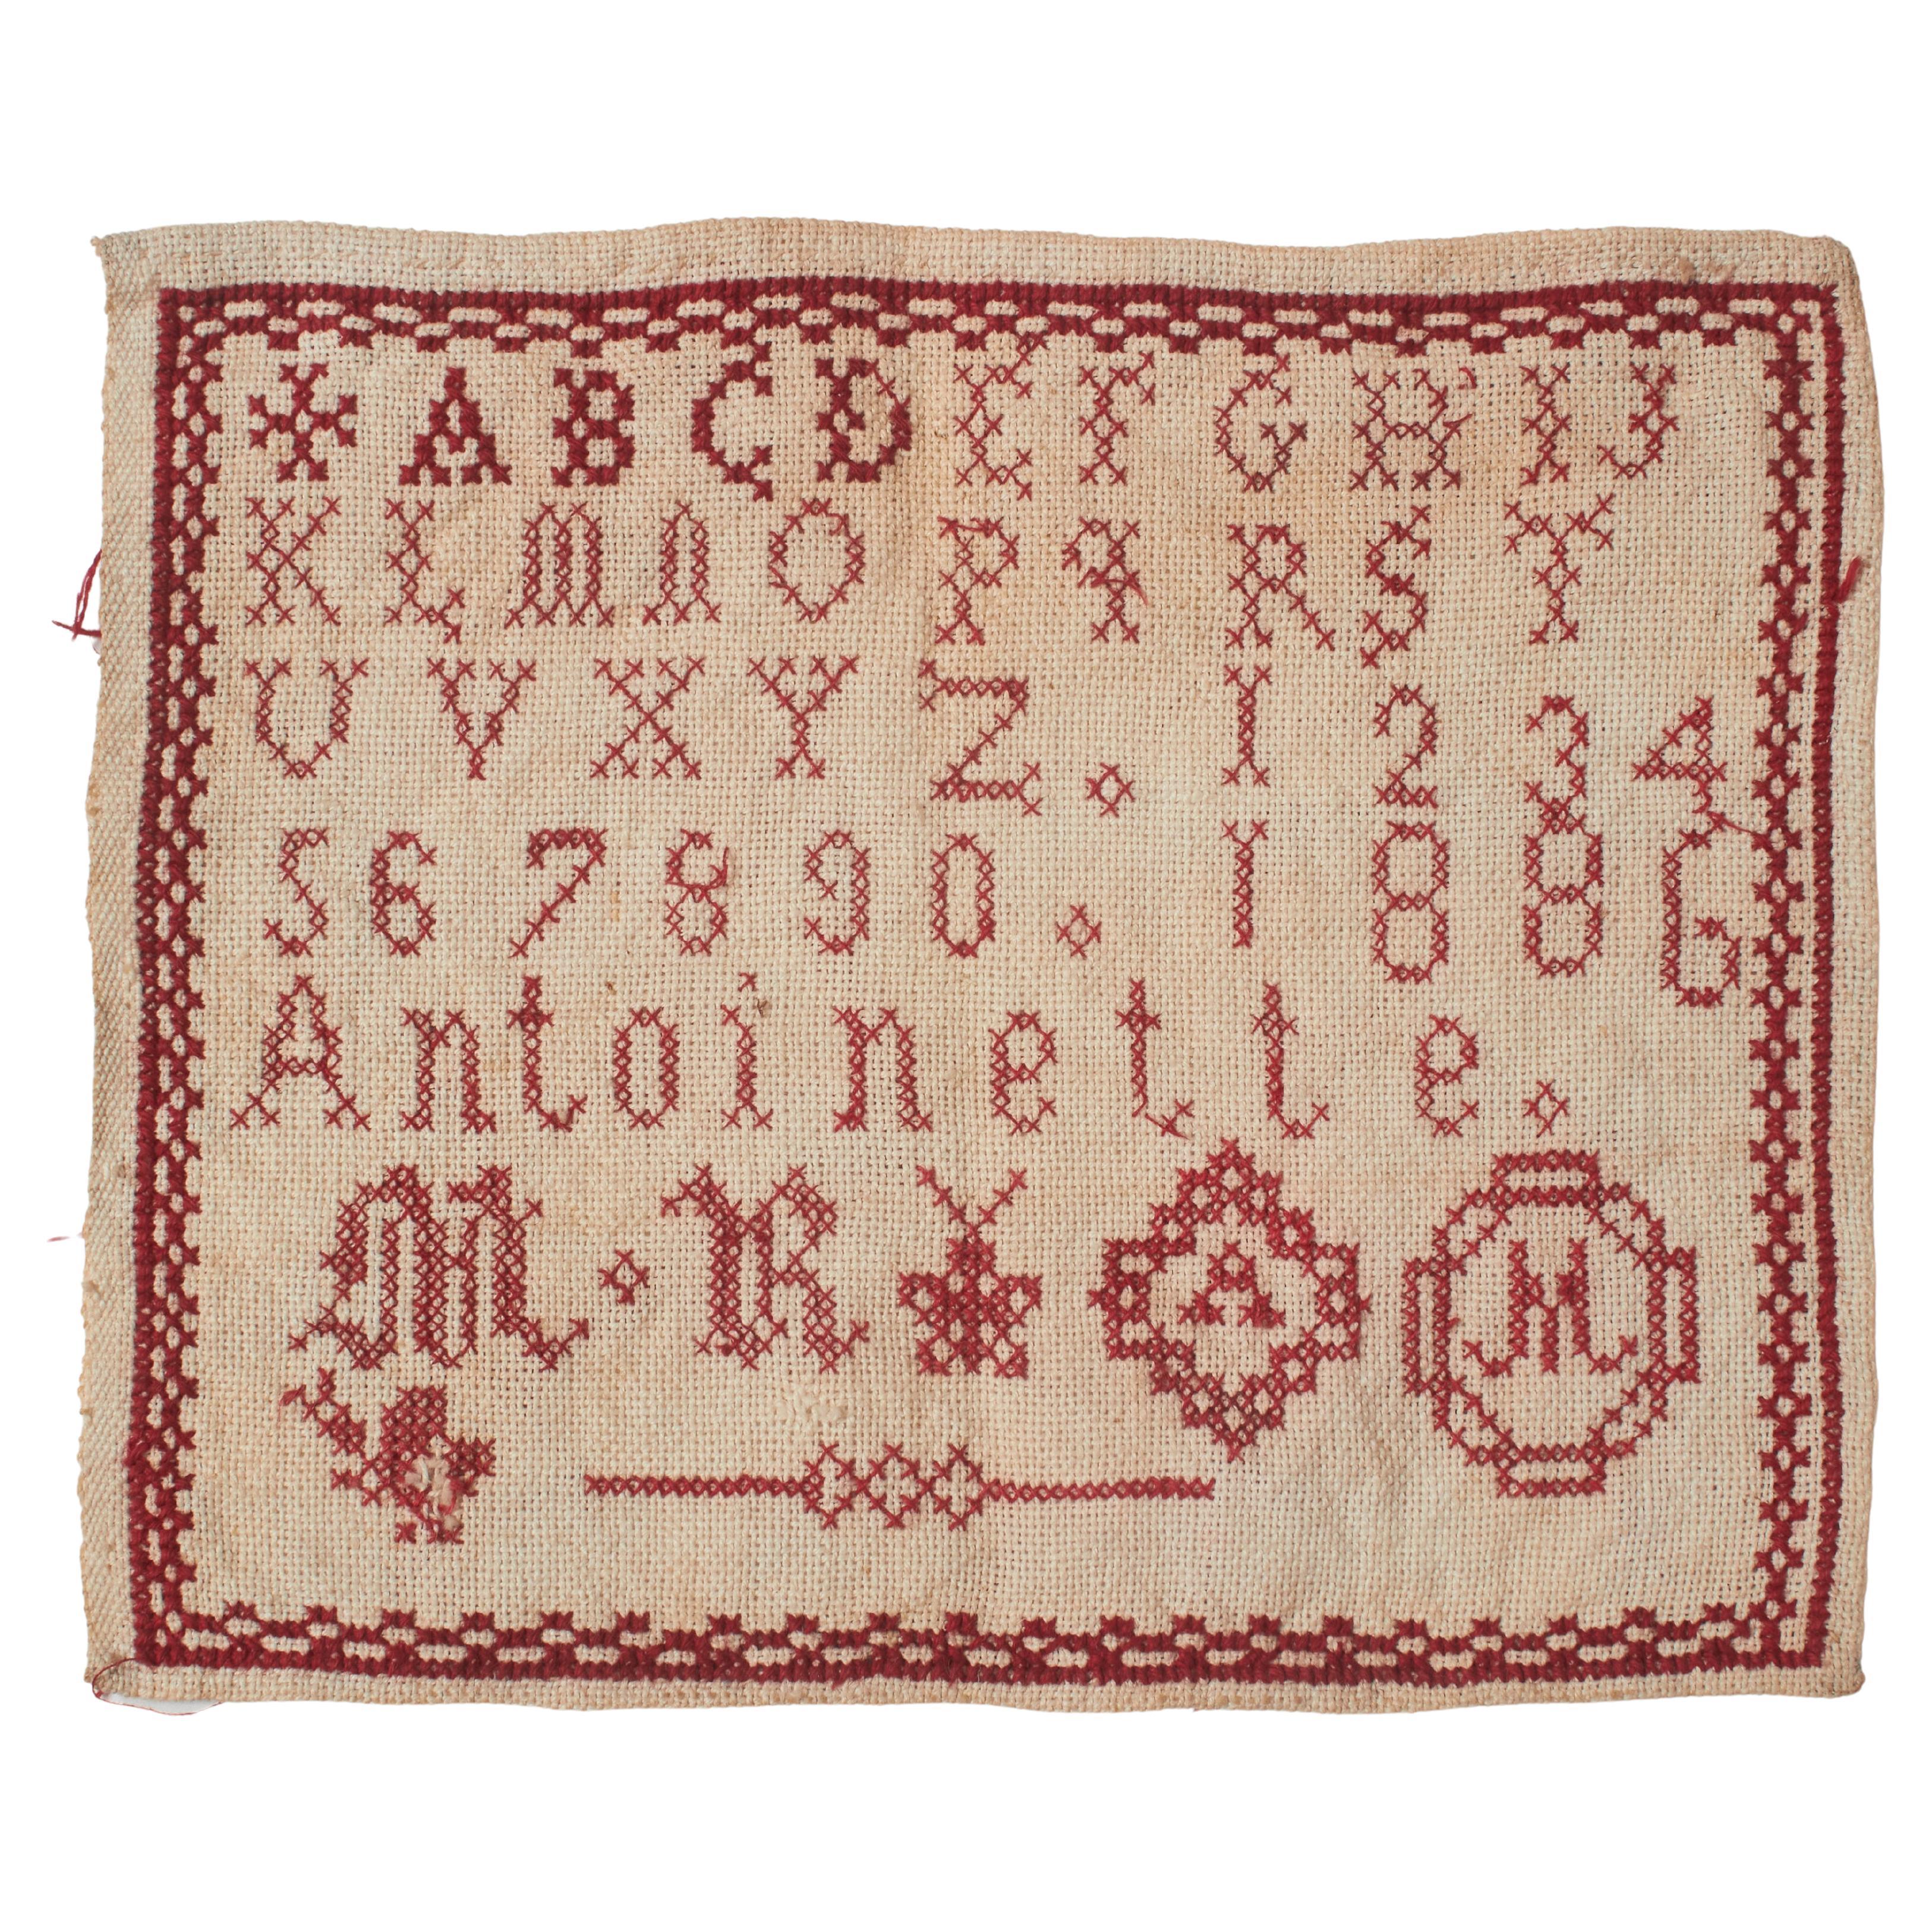 Antique 20th Century Cross-Stitch Sampler with Alphabet & Numbers For Sale